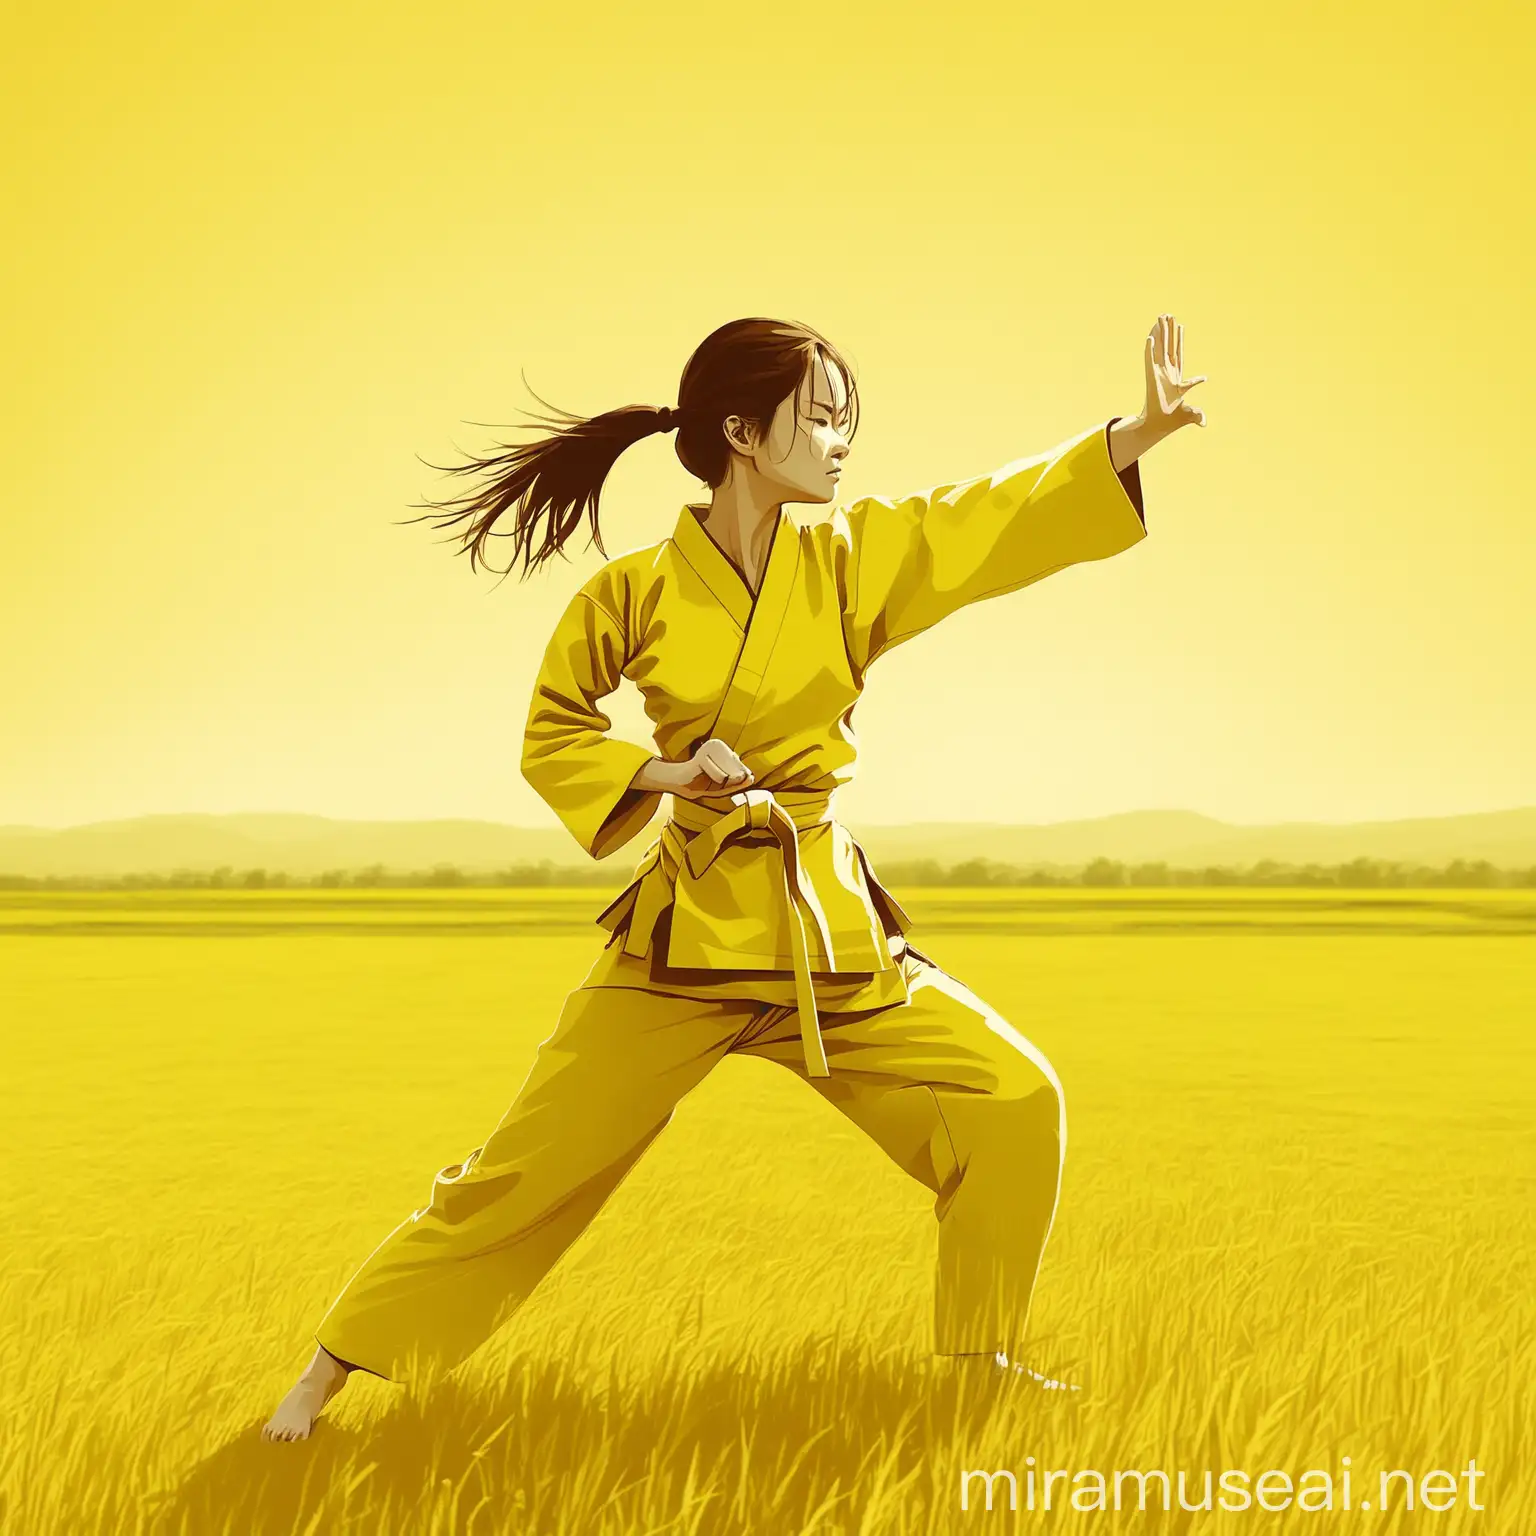 Woman Practicing Karate in Vibrant Yellow Field